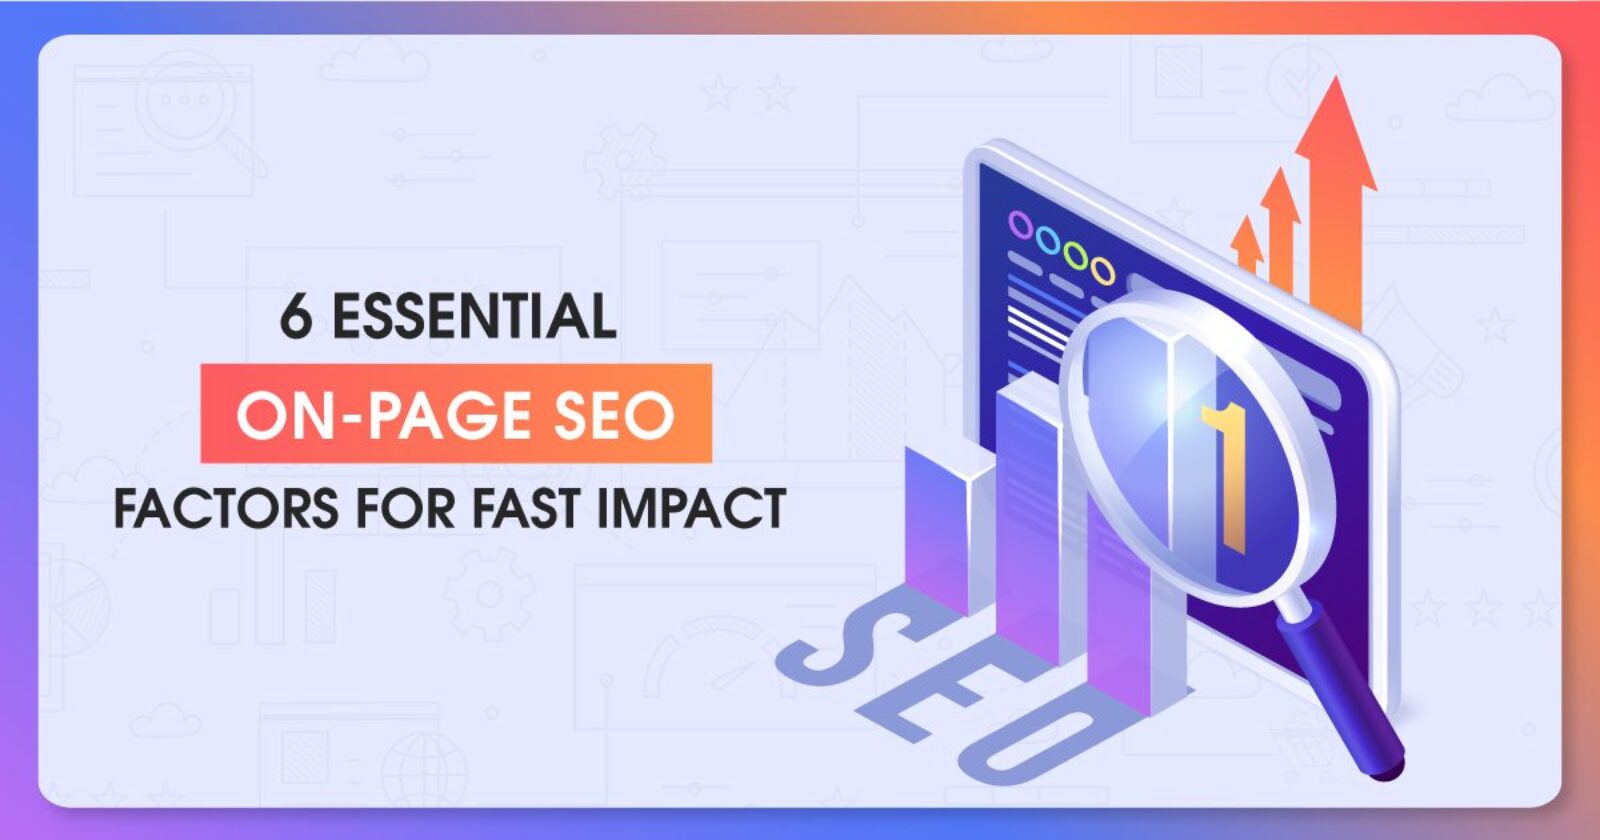 6 ESSENTIAL ON-PAGE SEO FACTORS FOR FAST IMPACT